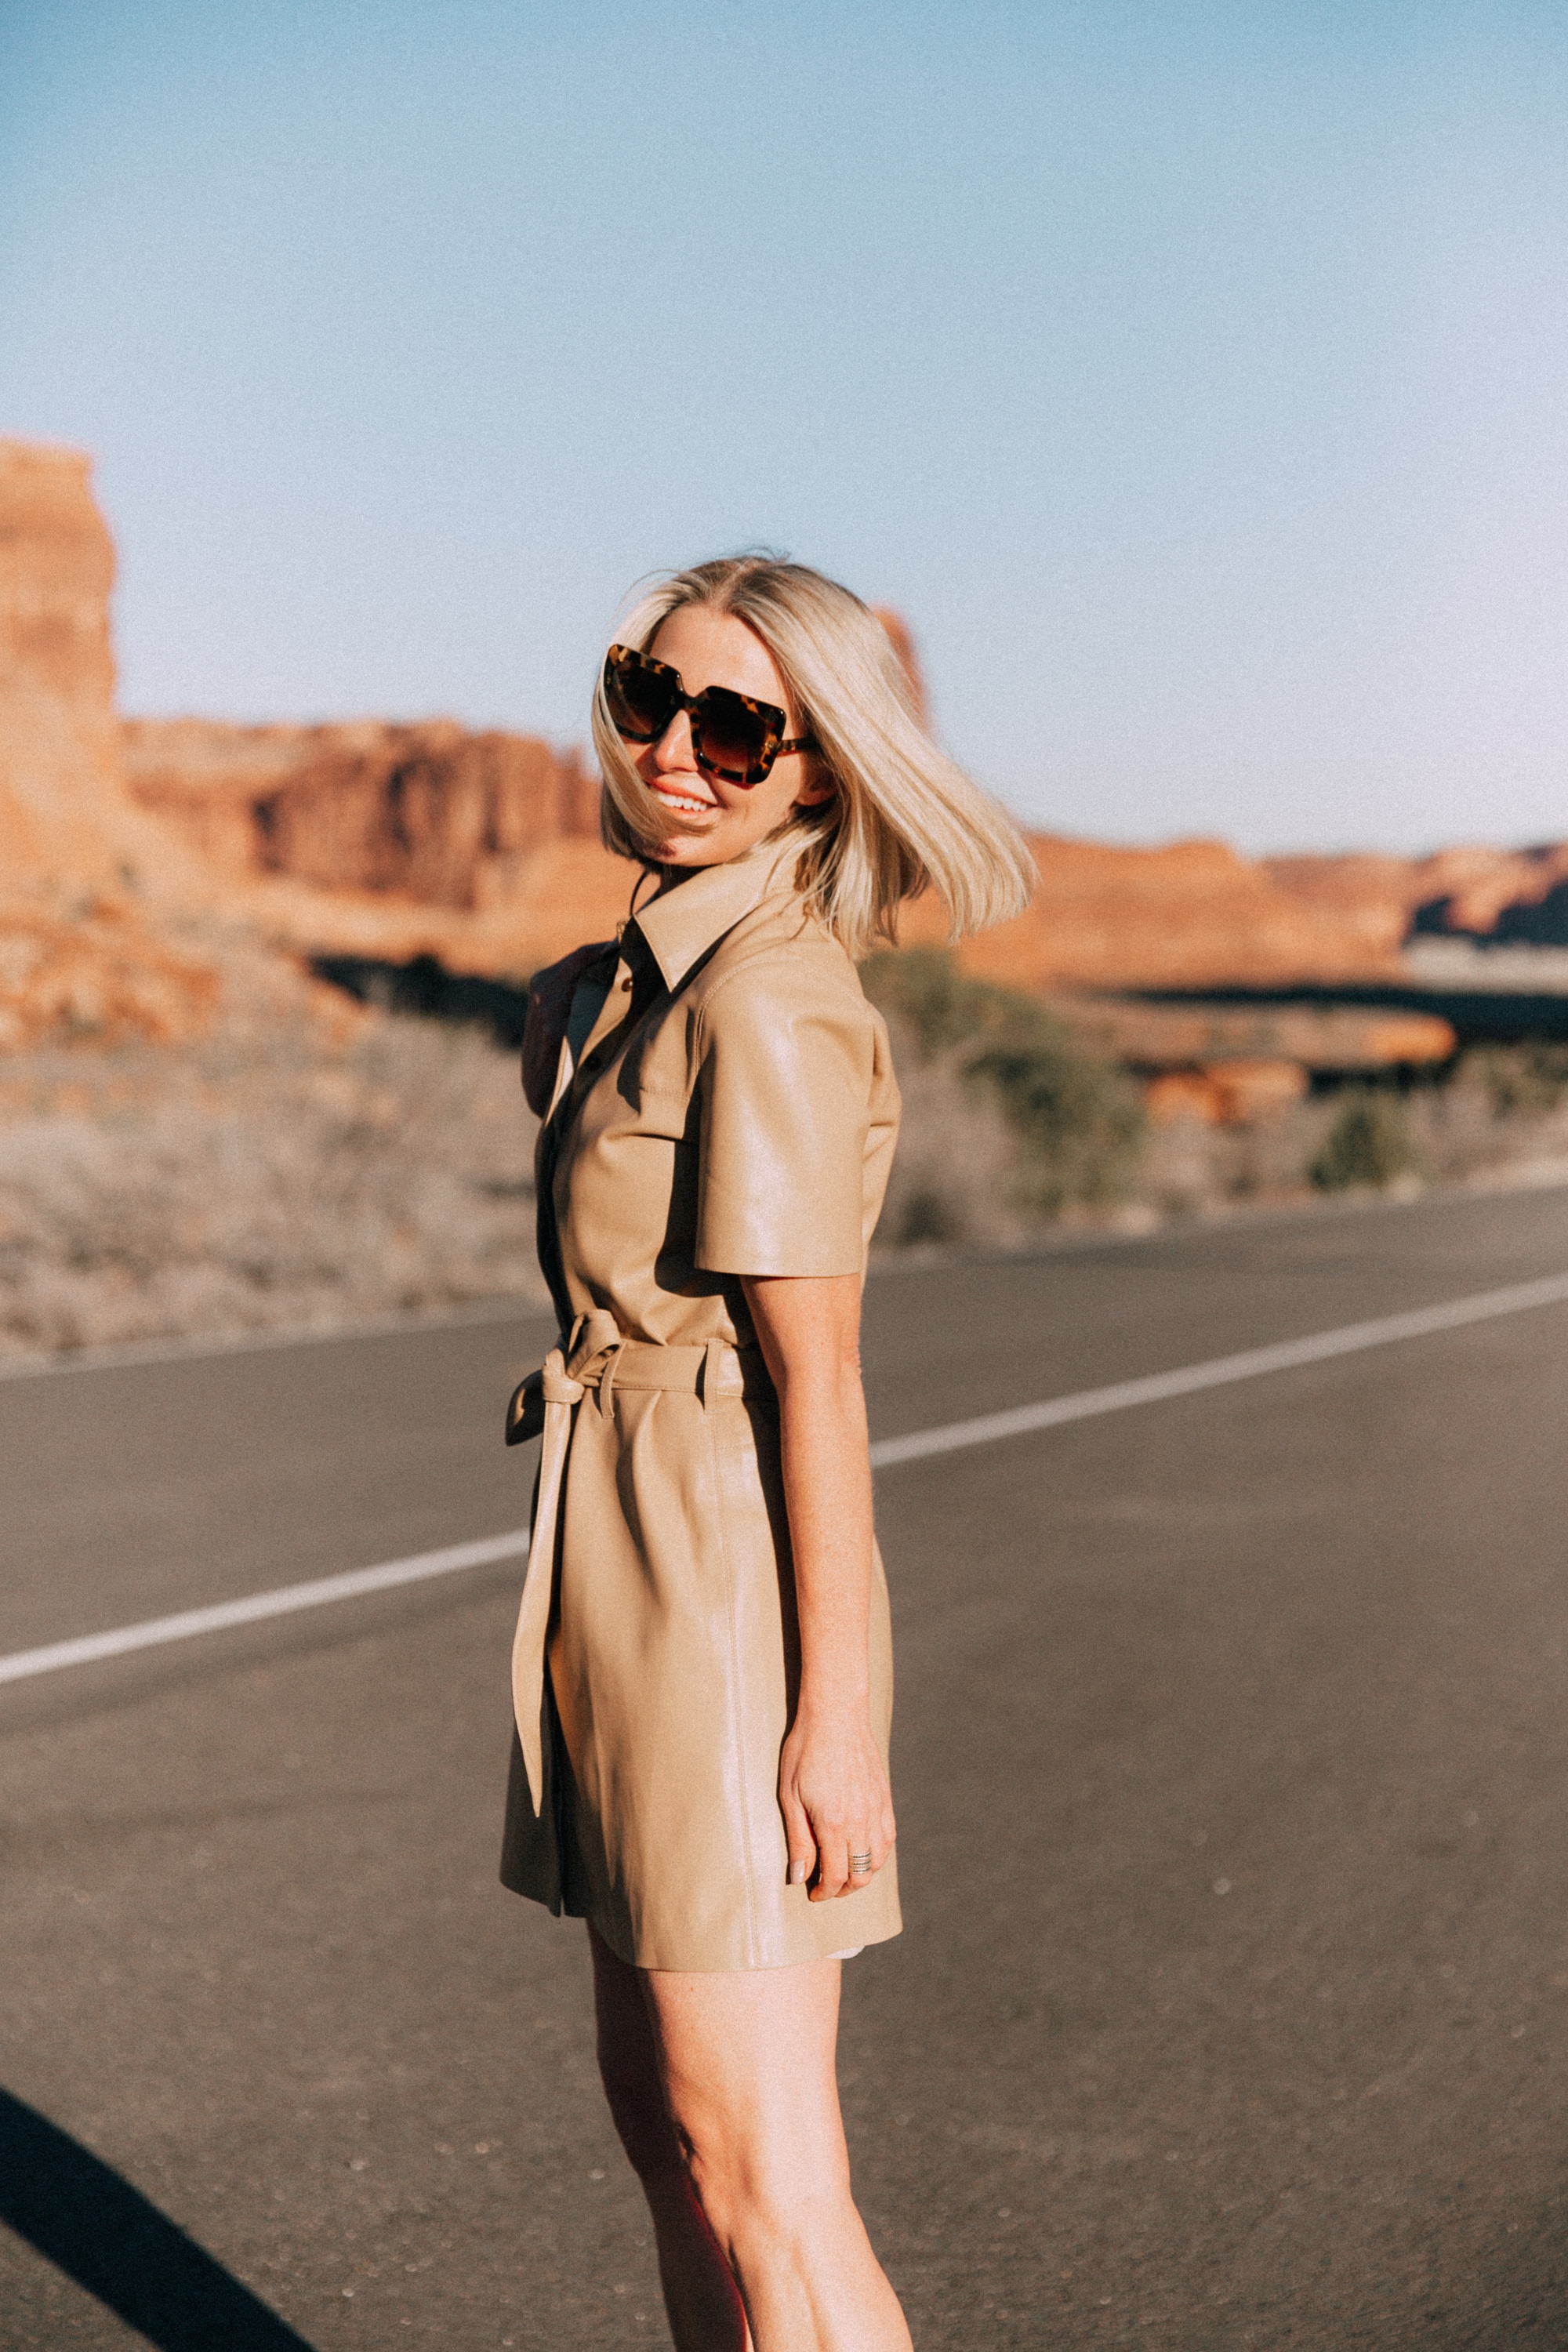 Spring Dresses, Fashion blogger Erin Busbee of BusbeeStyle.com wearing a chic tan leather dress with Dolce Vita python heels and a Lizzie Fortunato bag in Moab, Utah